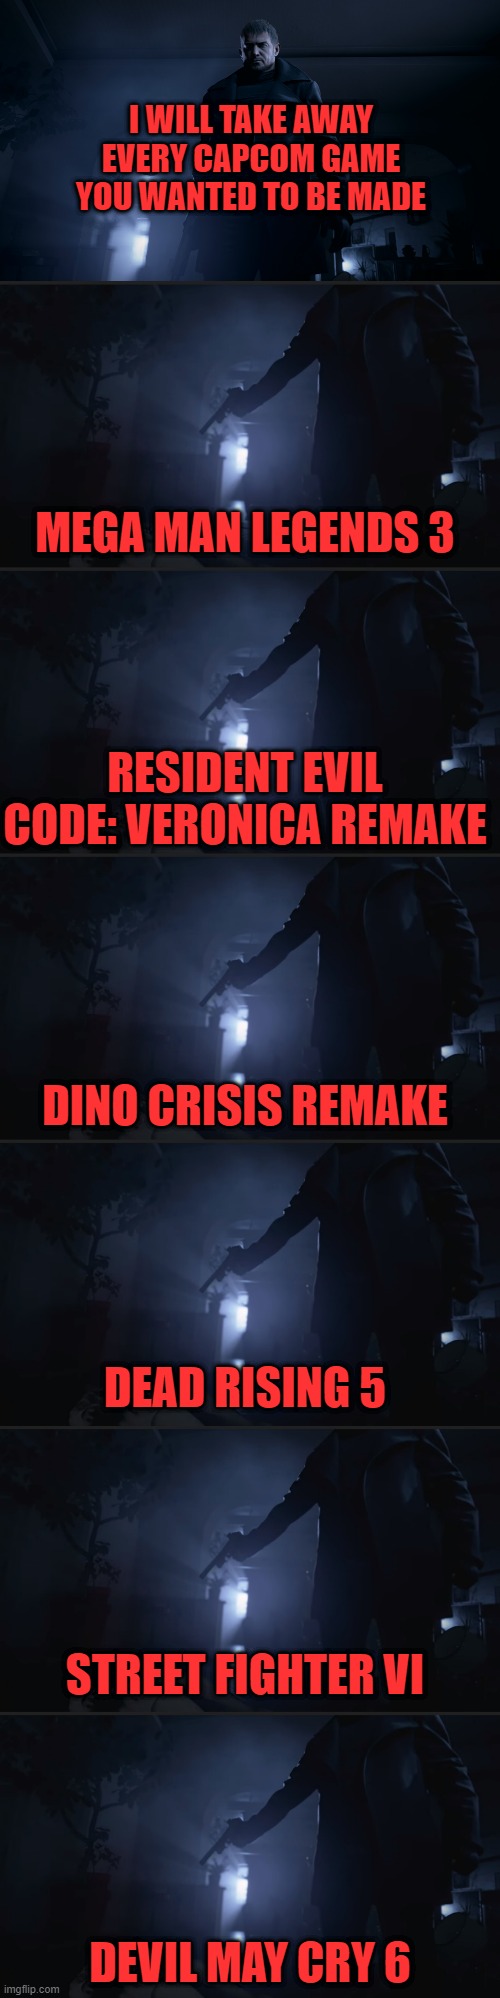 I WILL TAKE AWAY EVERY CAPCOM GAME YOU WANTED TO BE MADE; MEGA MAN LEGENDS 3; RESIDENT EVIL CODE: VERONICA REMAKE; DINO CRISIS REMAKE; DEAD RISING 5; STREET FIGHTER VI; DEVIL MAY CRY 6 | image tagged in capcom,resident evil,megaman,street fighter,devil may cry | made w/ Imgflip meme maker